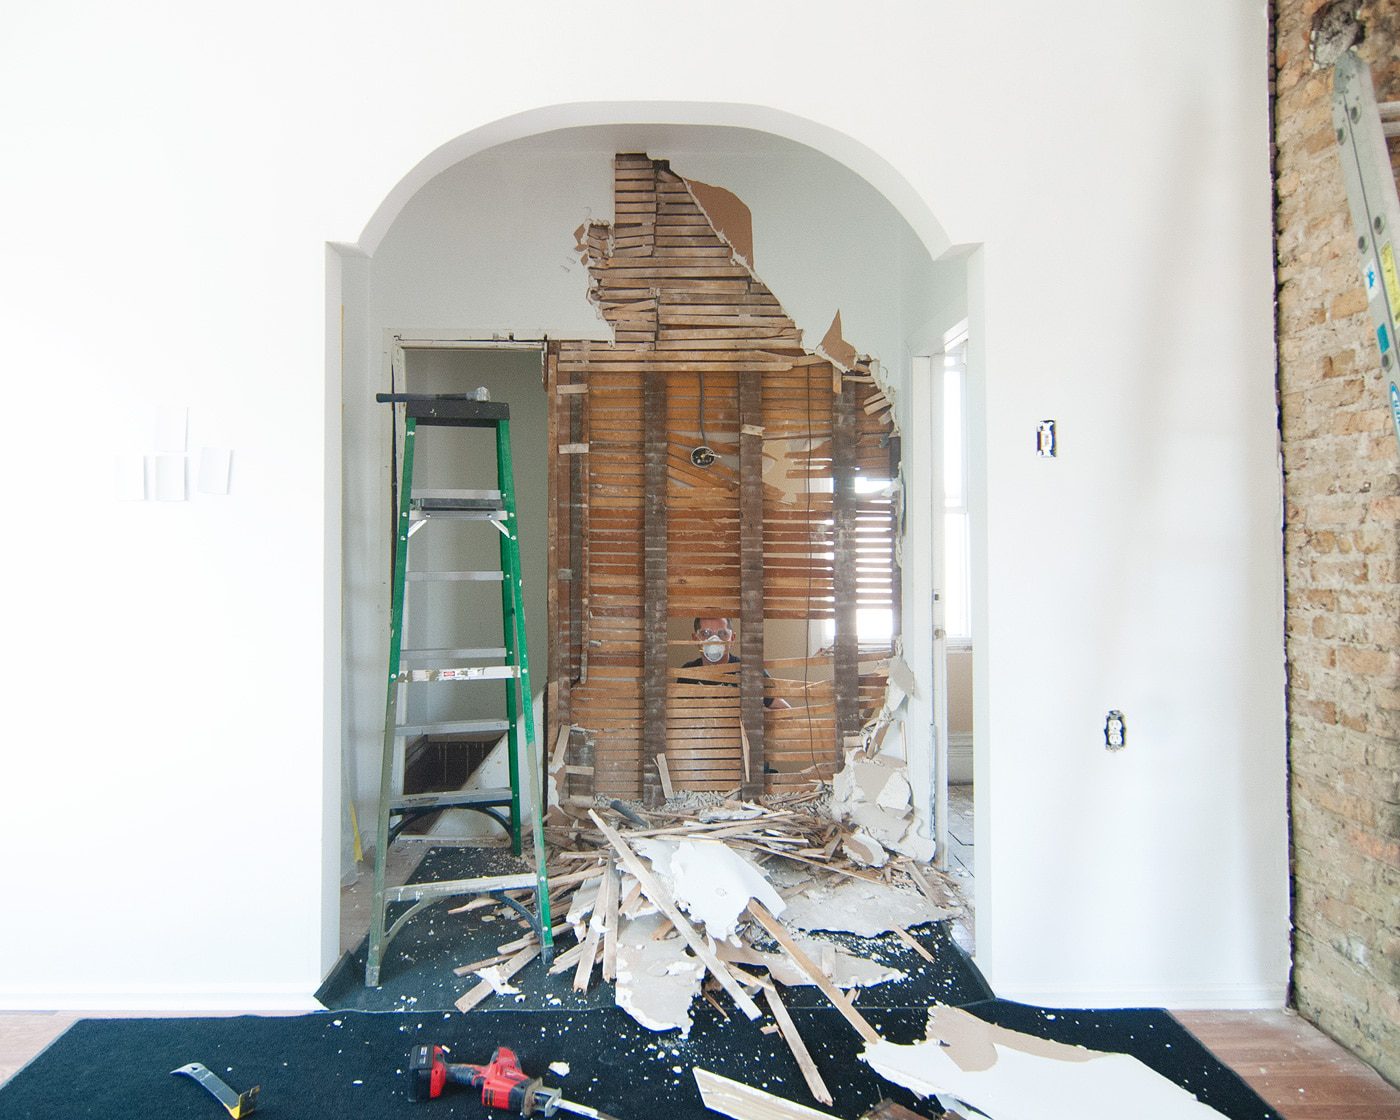 Moving, removing or adding a wall as a part of your home renovation | via Yellow Brick Home